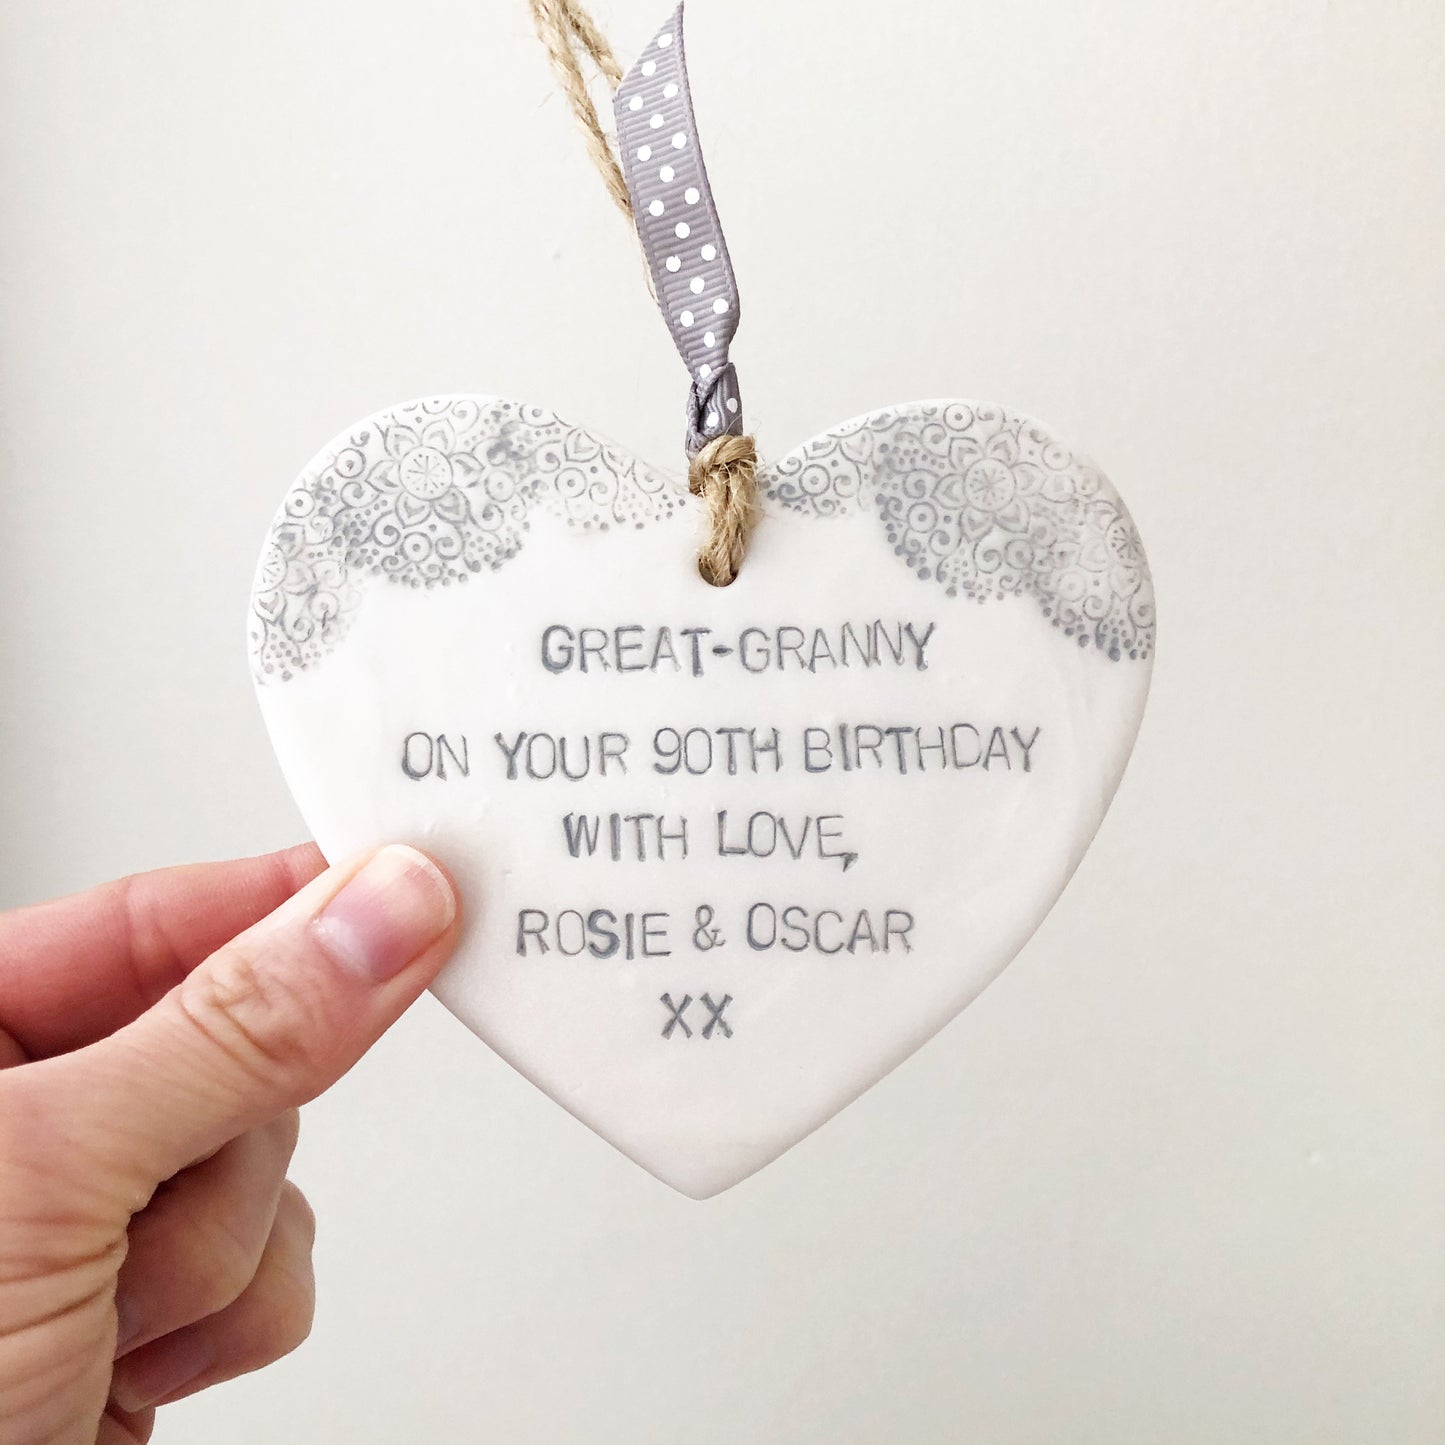 personalised pearlised white clay hanging hearts with a grey lace edge at the top of the heart, the heart is personalised with GREAT-GRANNY ON YOUR 90TH BIRTHDAY WITH LOVE, ROSIE & OSCAR XX